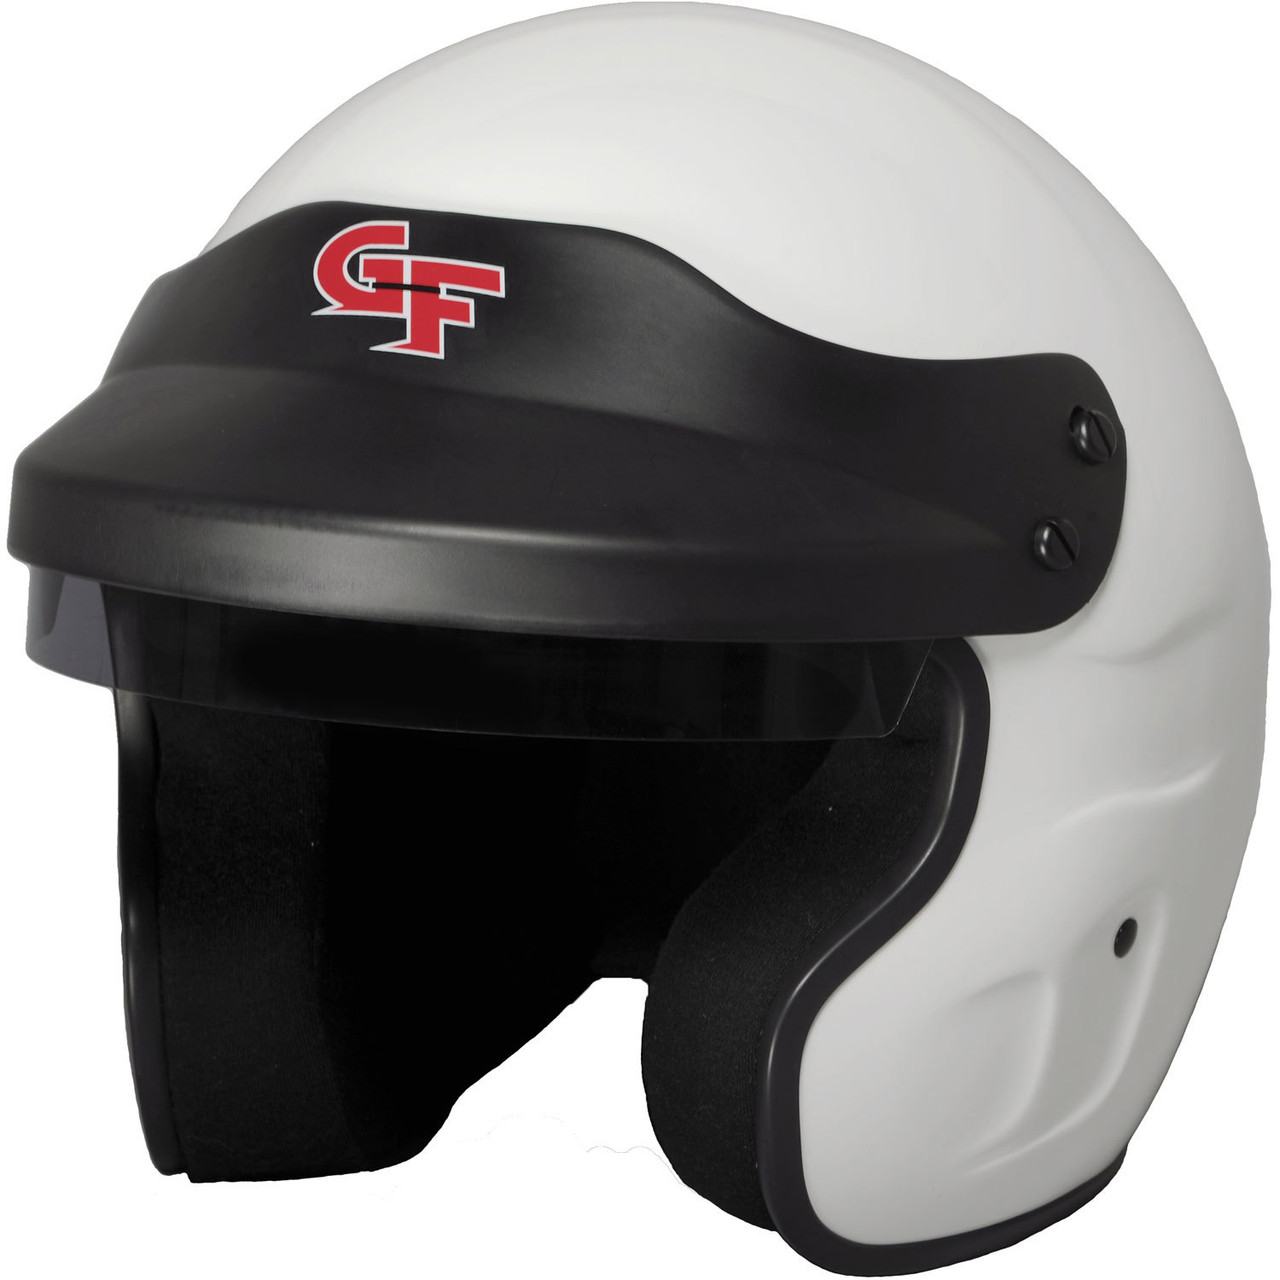 GFR13002LRGWH, Helmet, GF1, Open Face, Snell SA2020, Head and Neck Support Ready, White, Large, Each